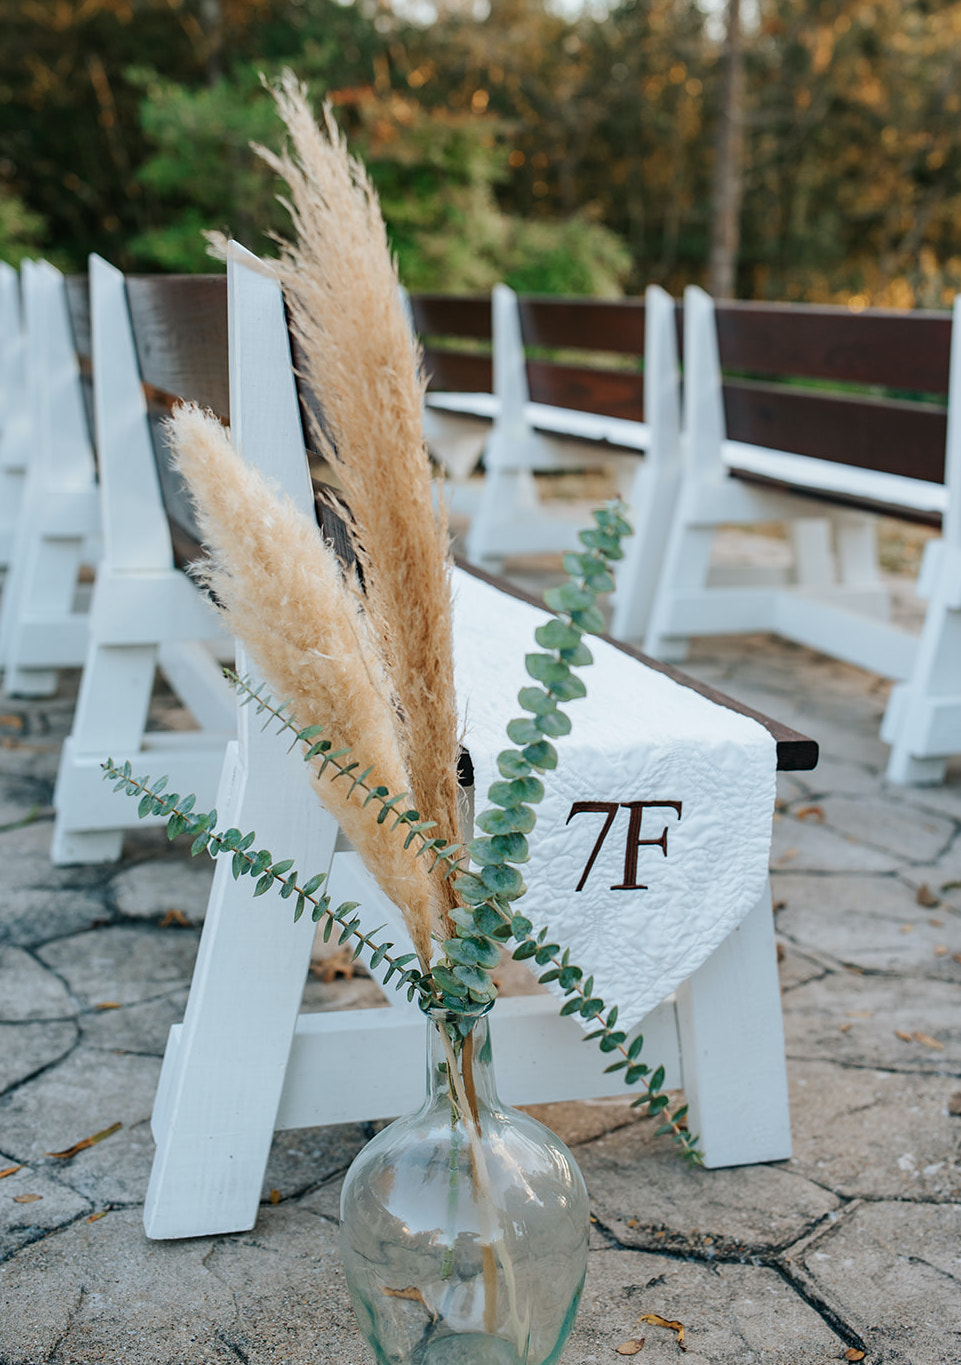 A glass bottle filled with Pampas grass and Eucalyptus is placed next to a white aisle bench outside for a winter wedding ceremony at 7F Lodge in College Station, TX.